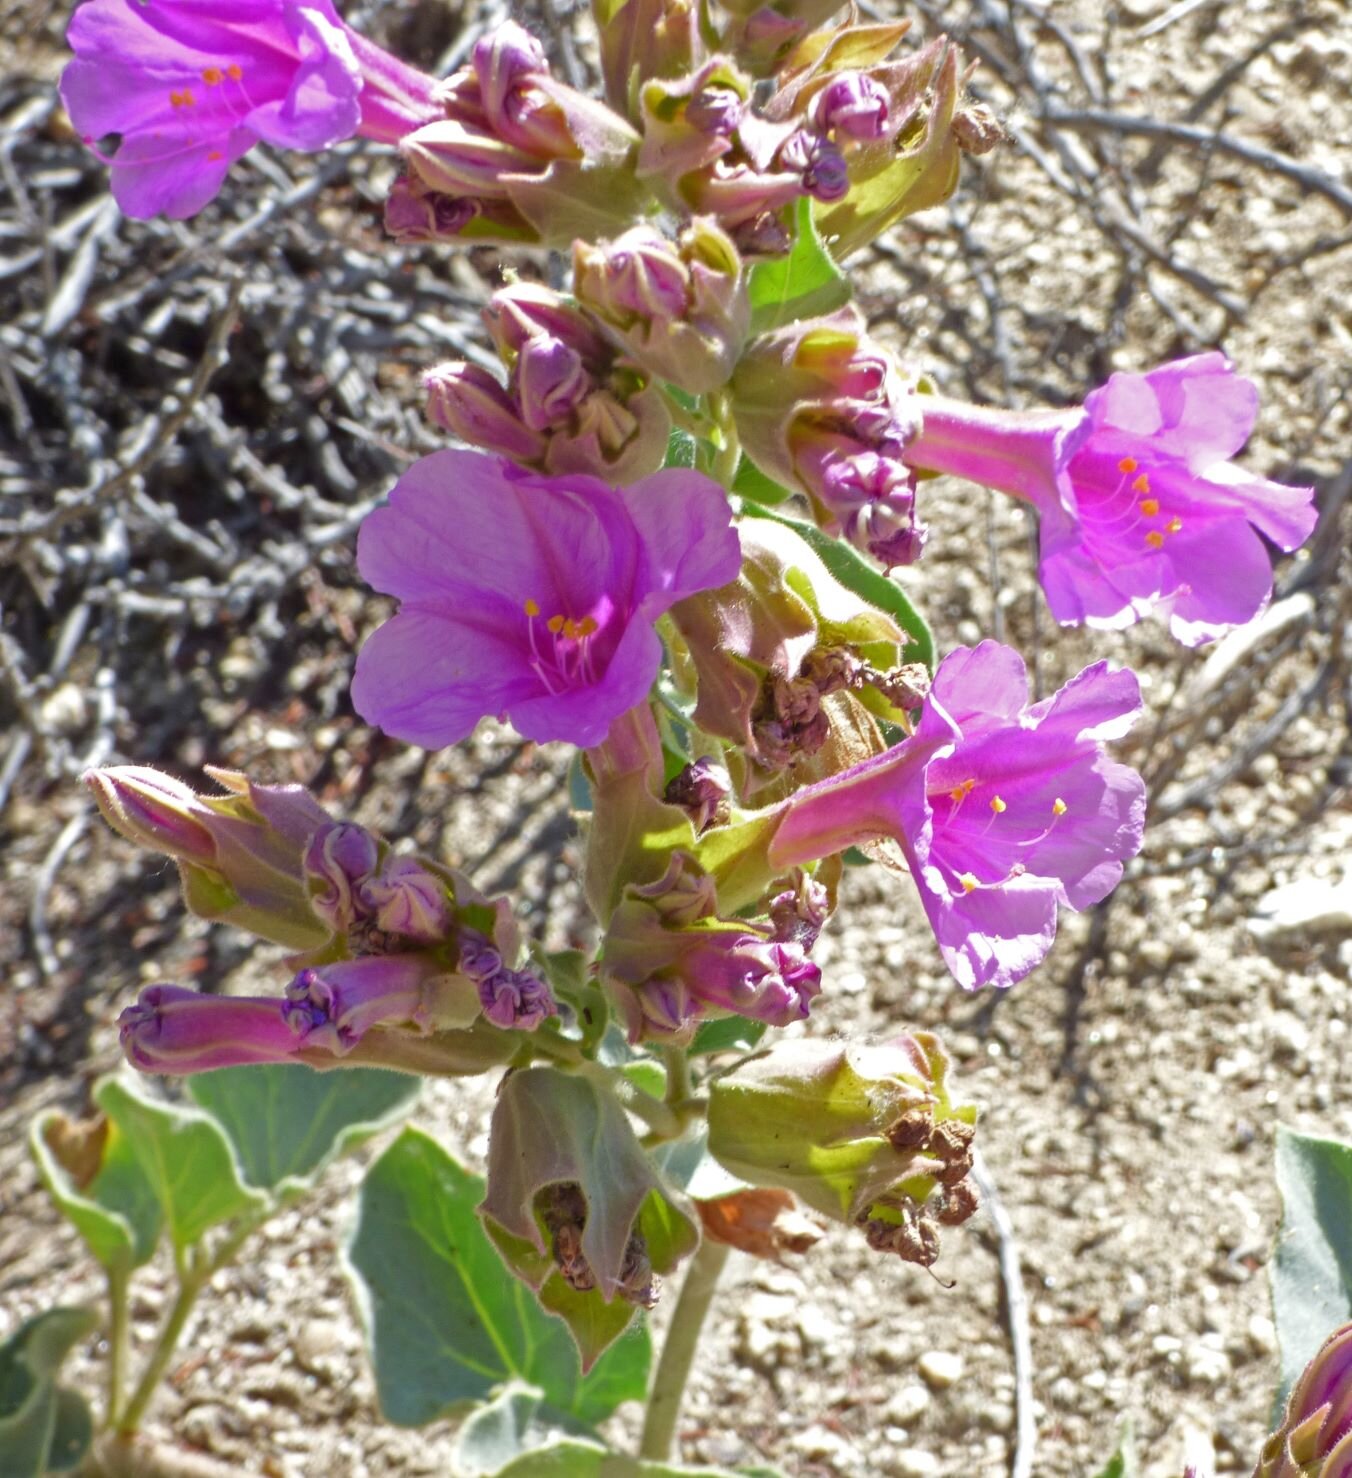  we were welcomed by Giant Four O’clock (Mirabilis multiflora),